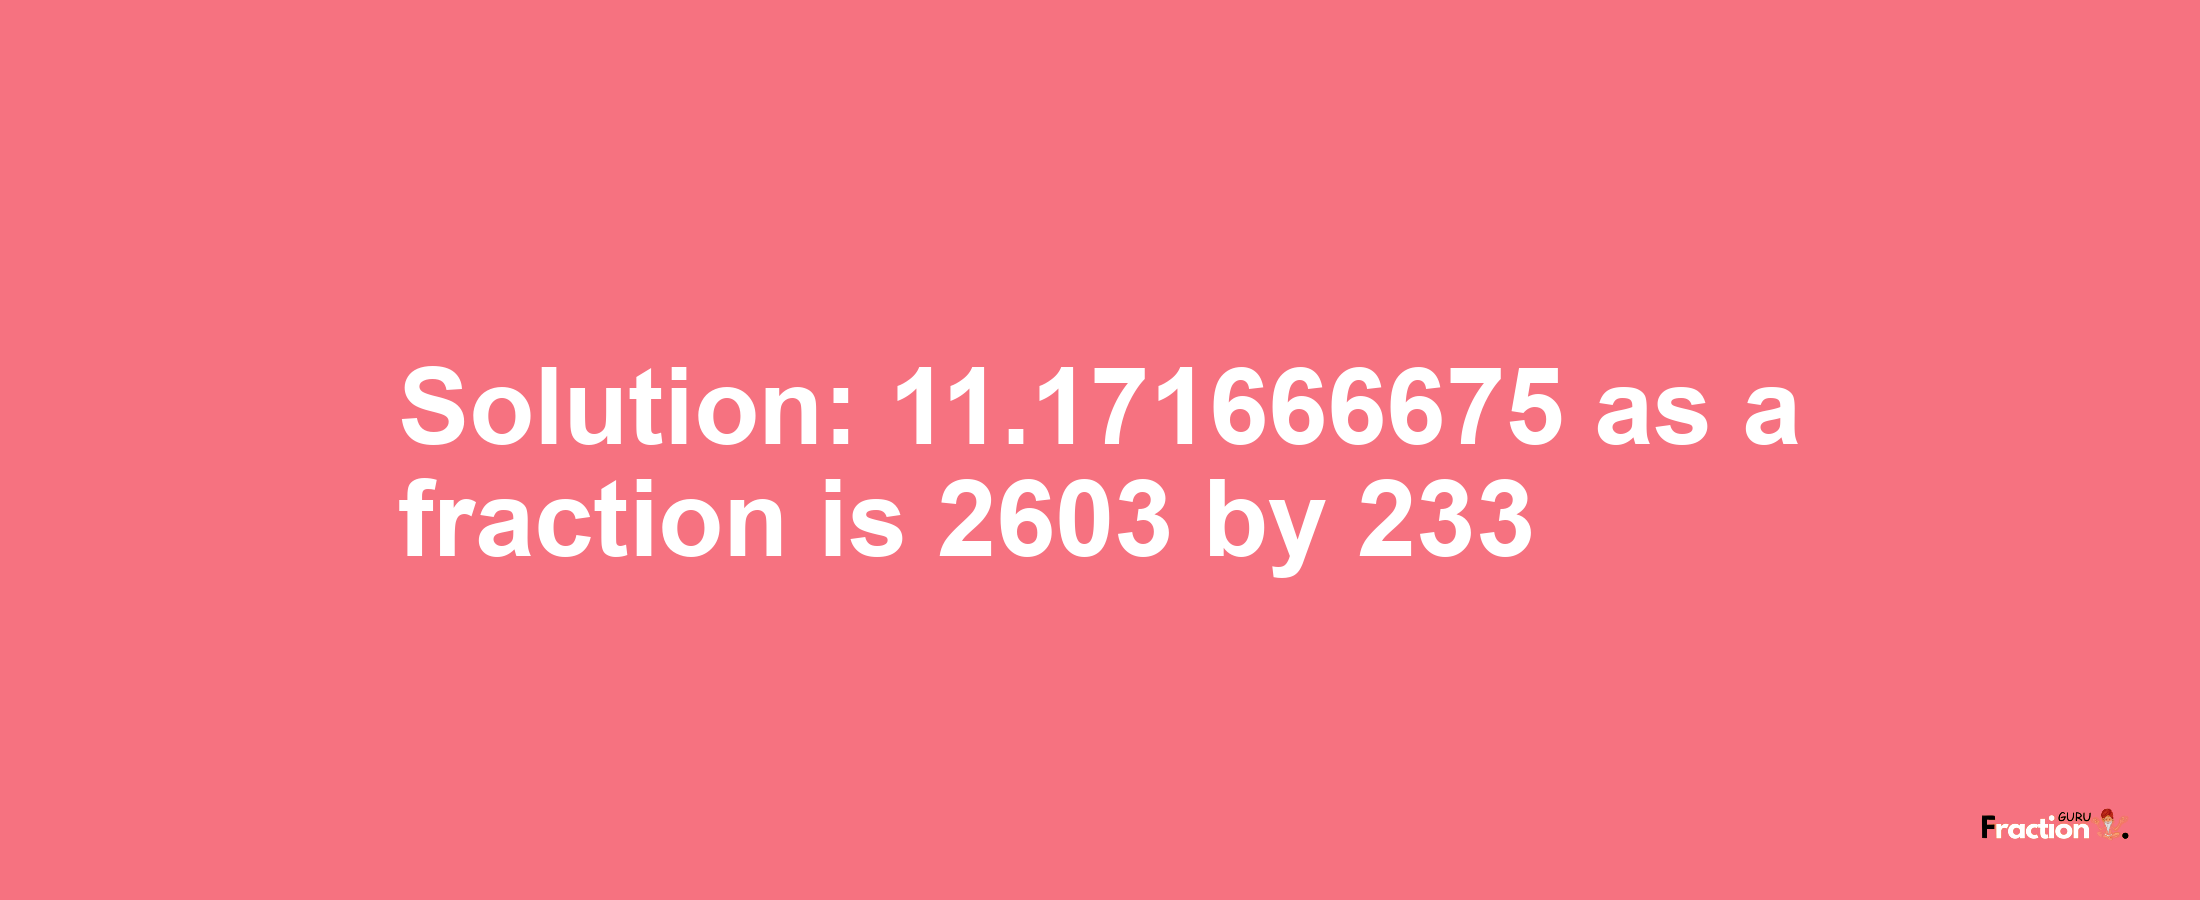 Solution:11.171666675 as a fraction is 2603/233